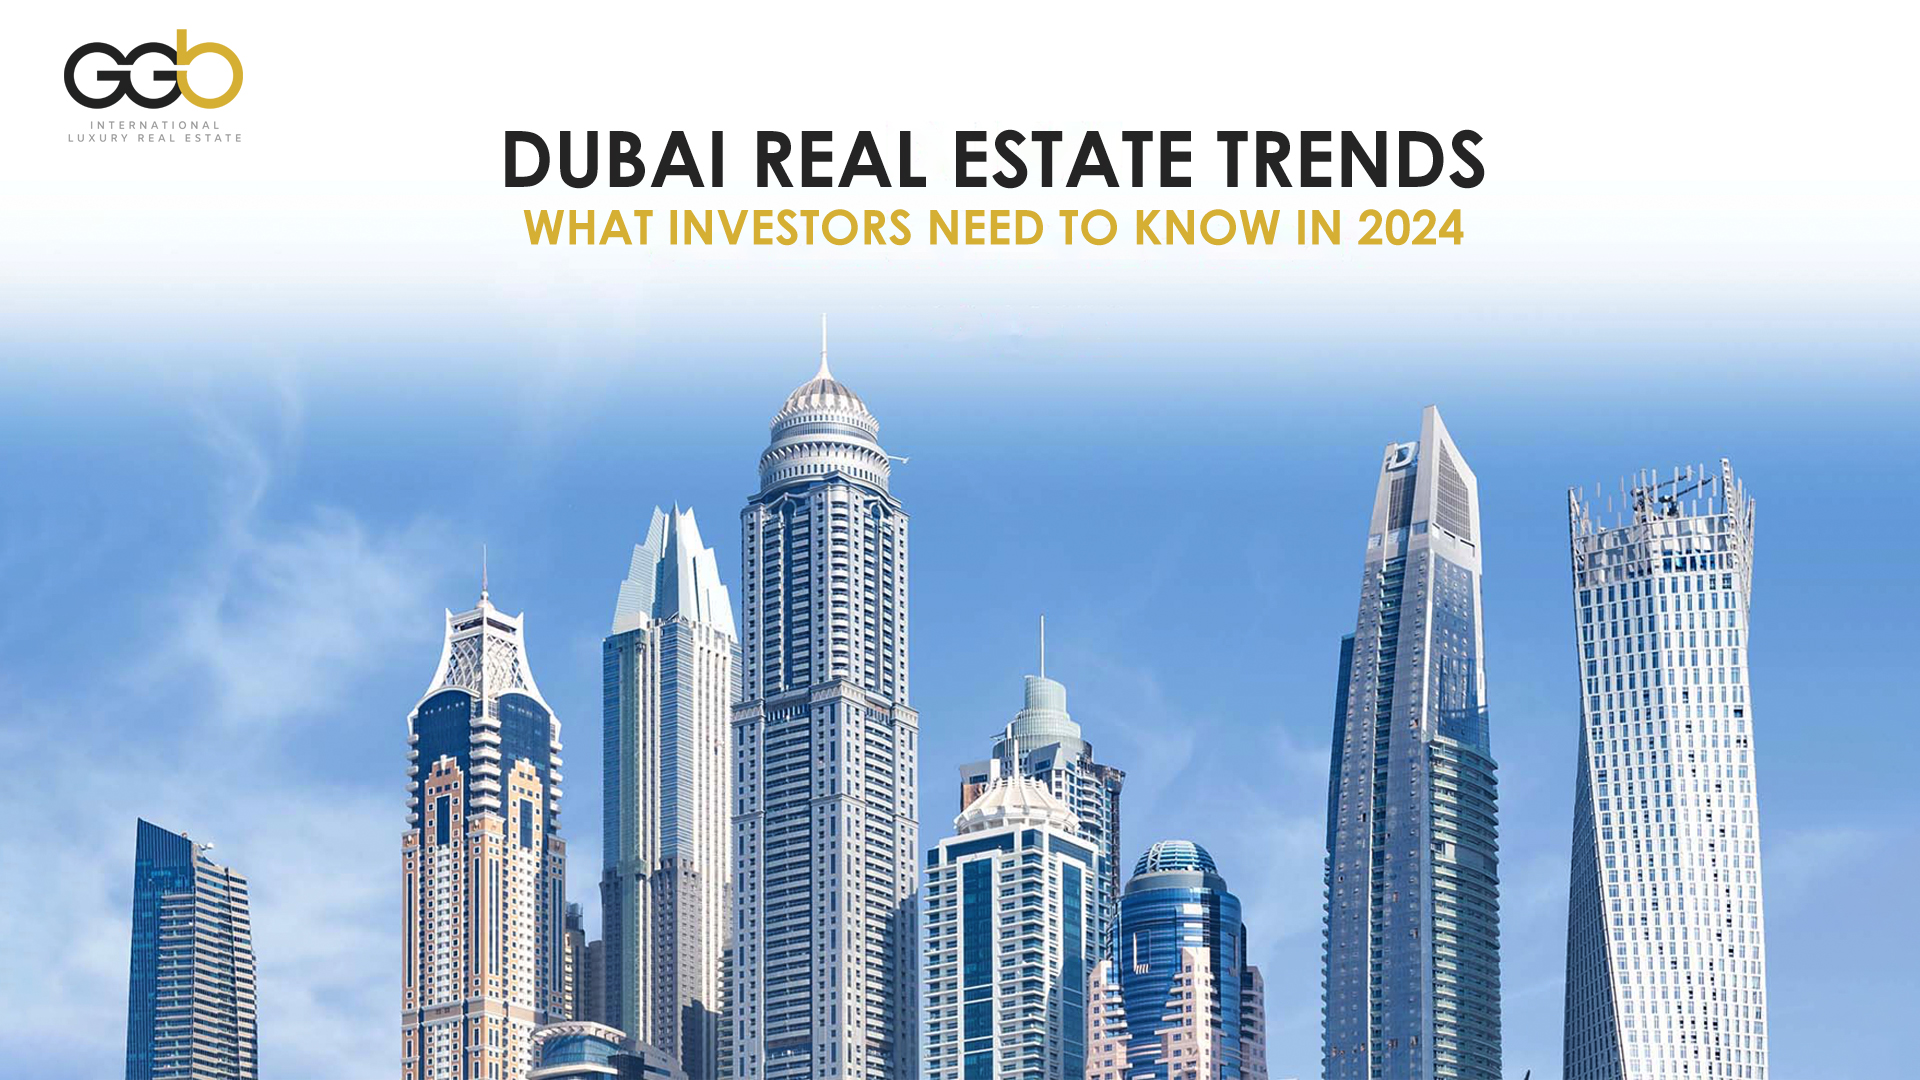 Dubai Real Estate Trends: What Investors Need to Know in 2024